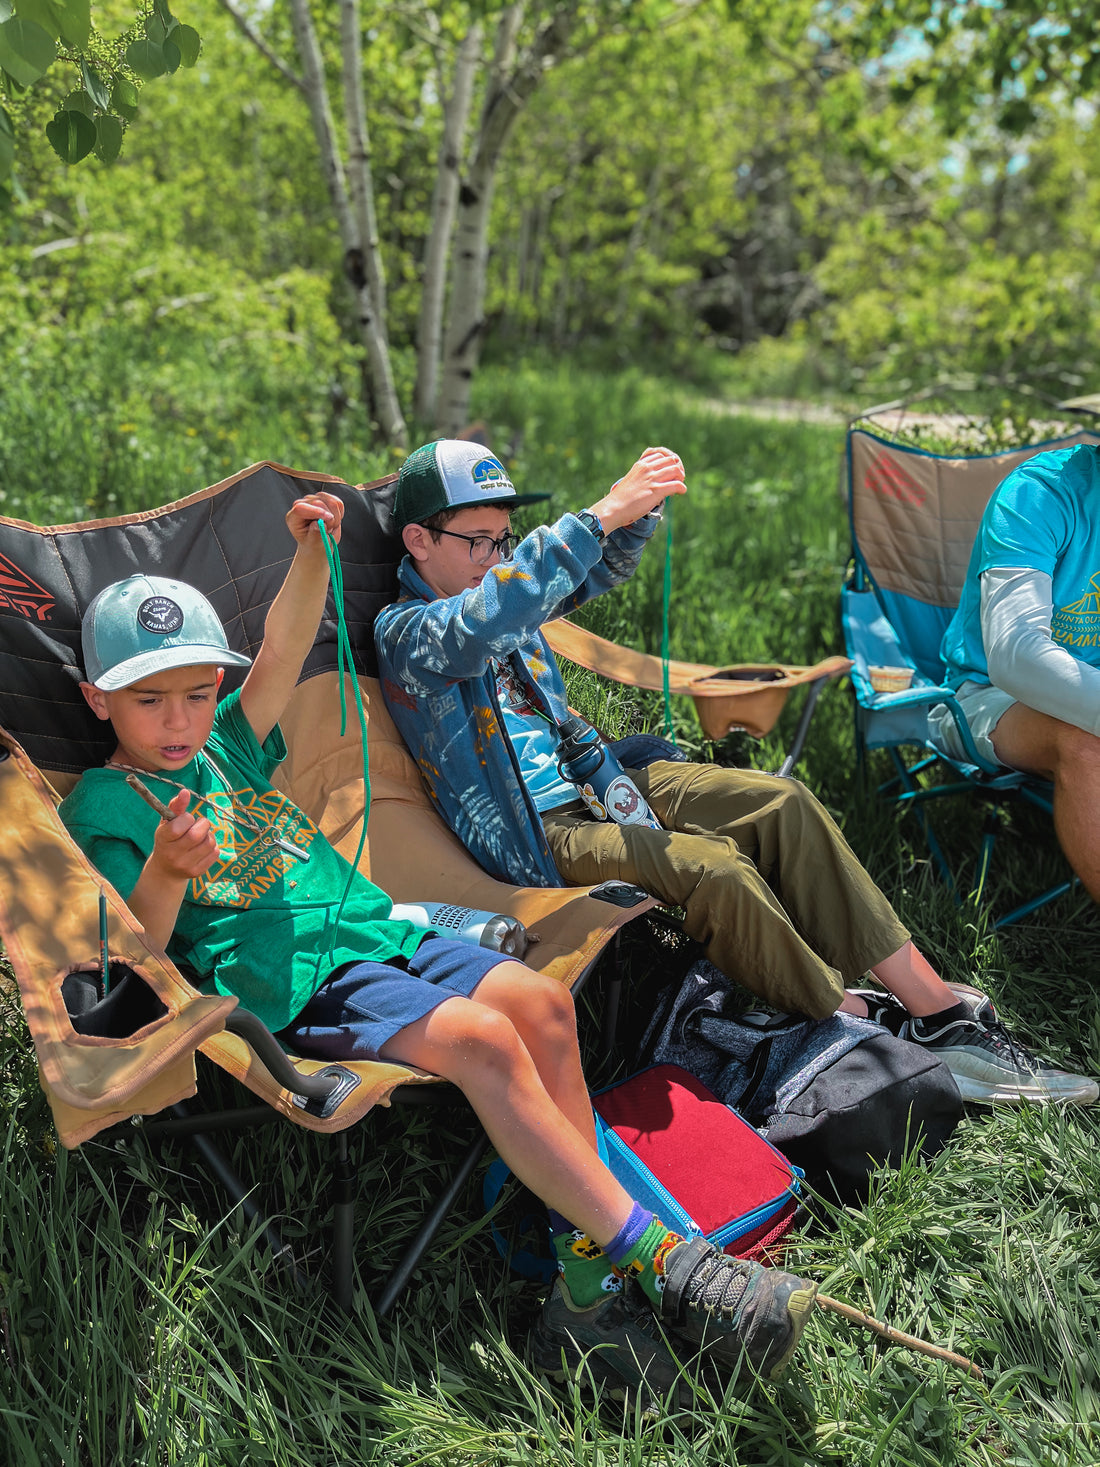 Campers sit on camp chairs to practice basic knot tying in the mountains.